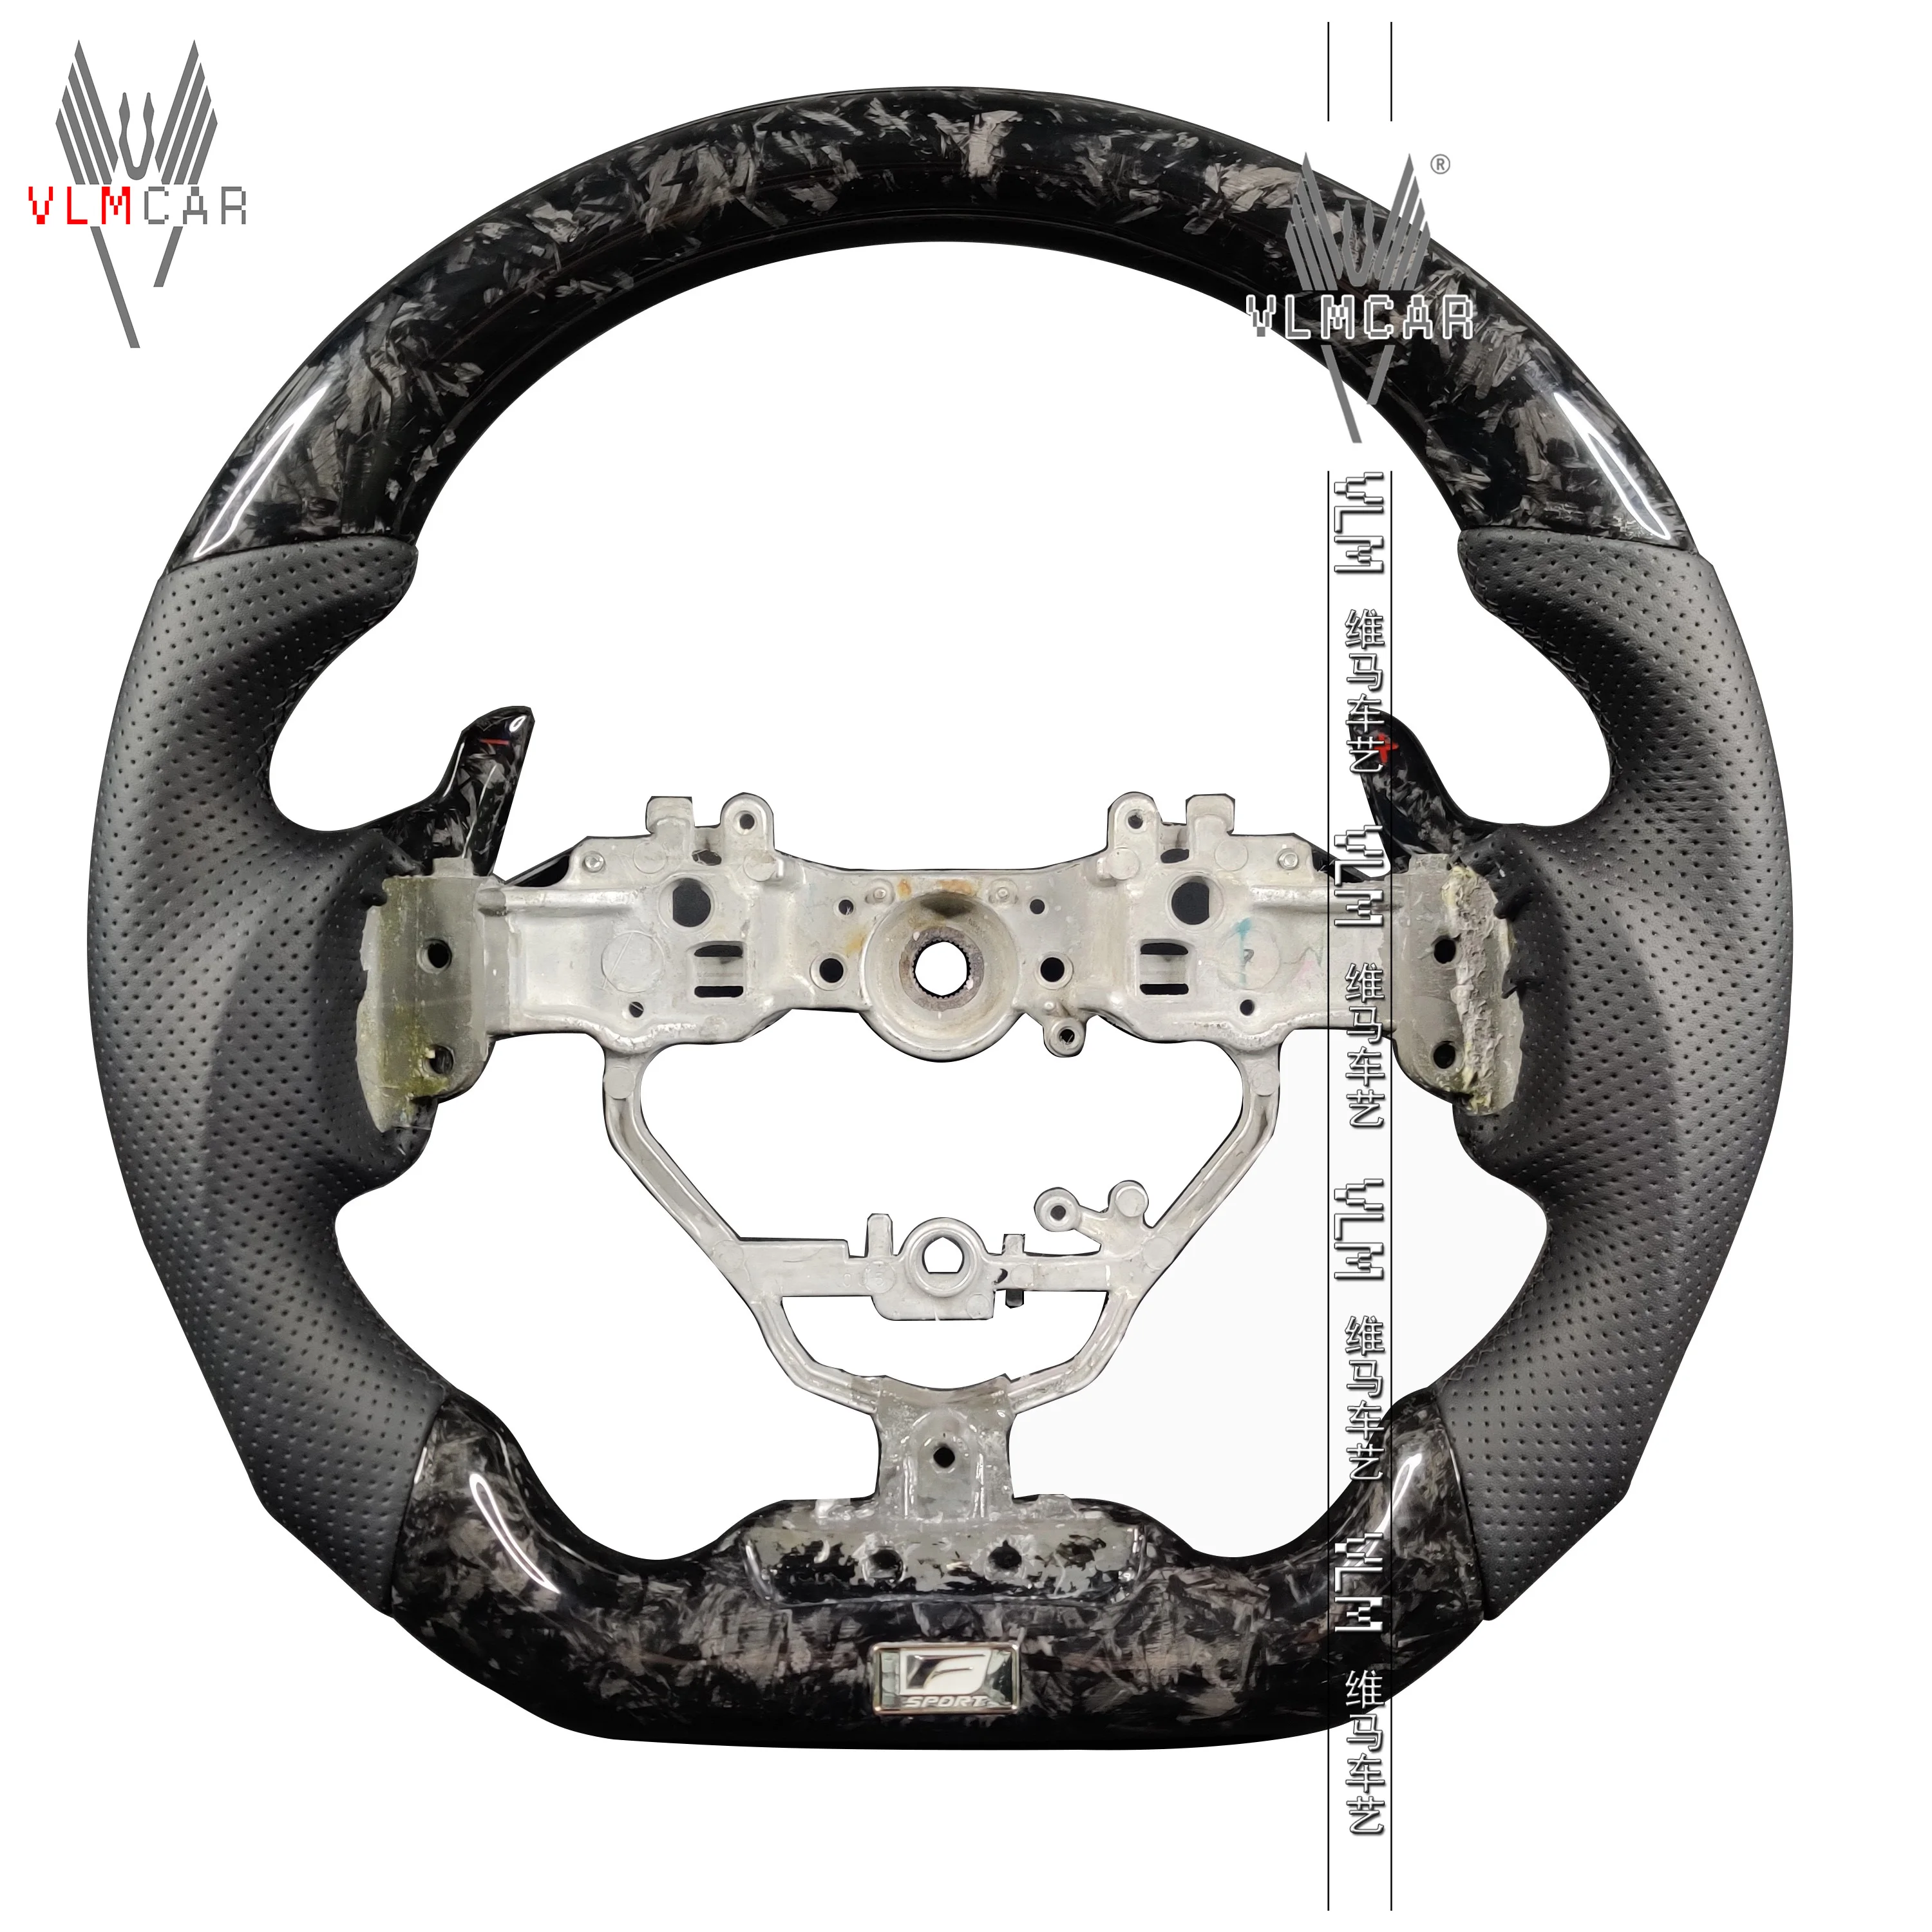 

VLMCAR Private Custom Carbon Fiber Steering Wheel For Lexus IS ISF ES RX Car Accessories Led Display Flat Bottom With Paddles